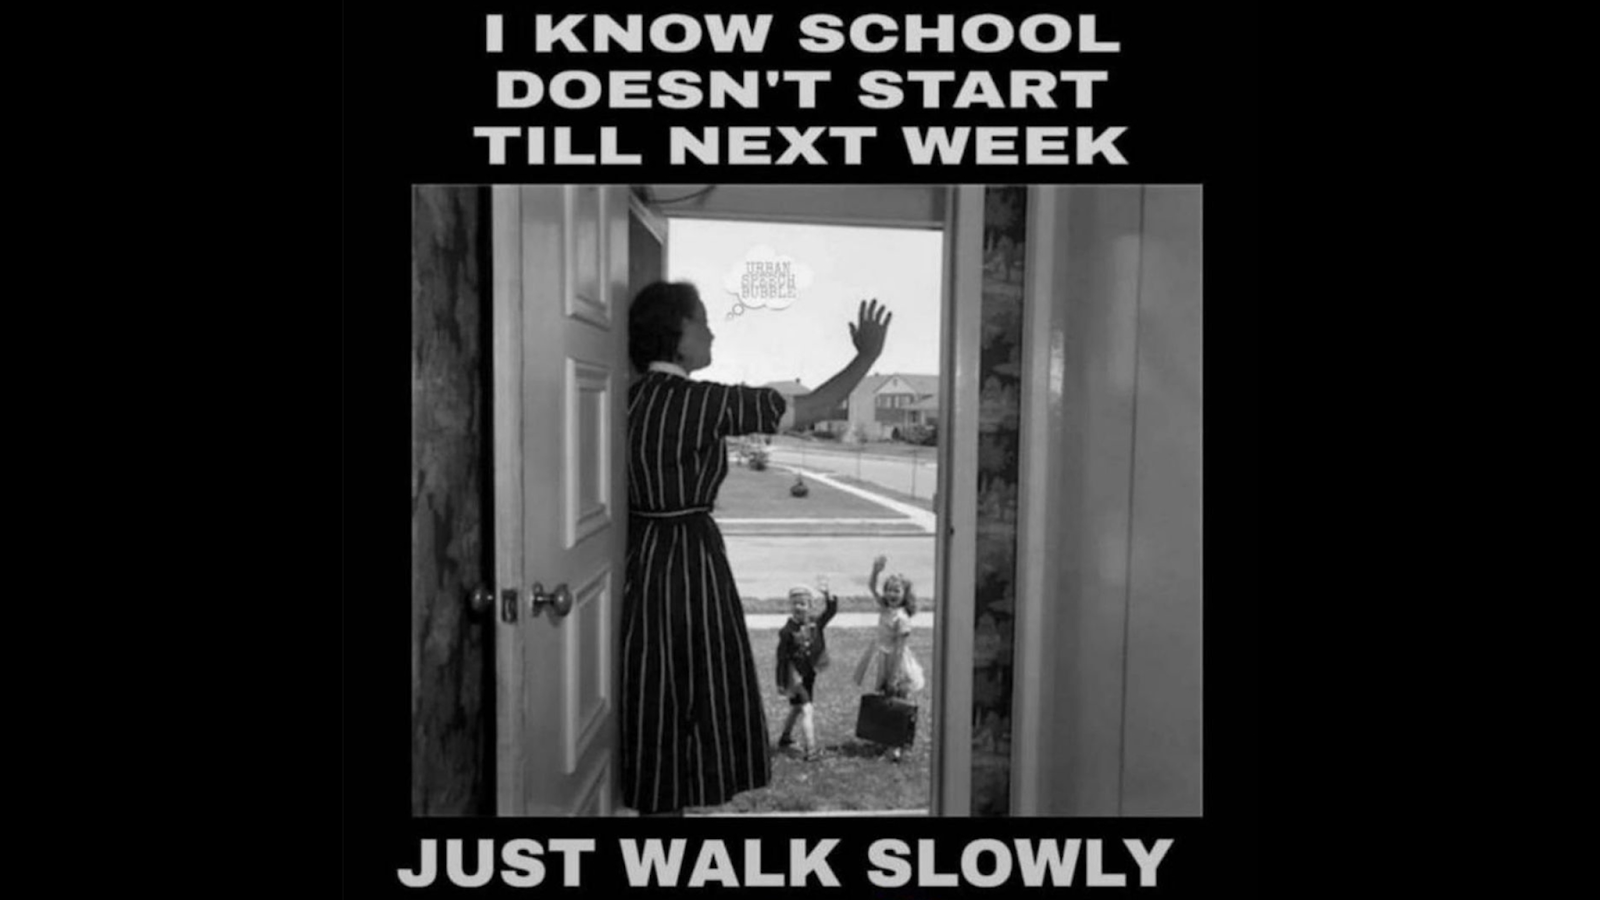 Mom waving goodbye from the doorway to two young kids in the front yard.
Caption: I know school doesn’t start till next week Just walk slowly.